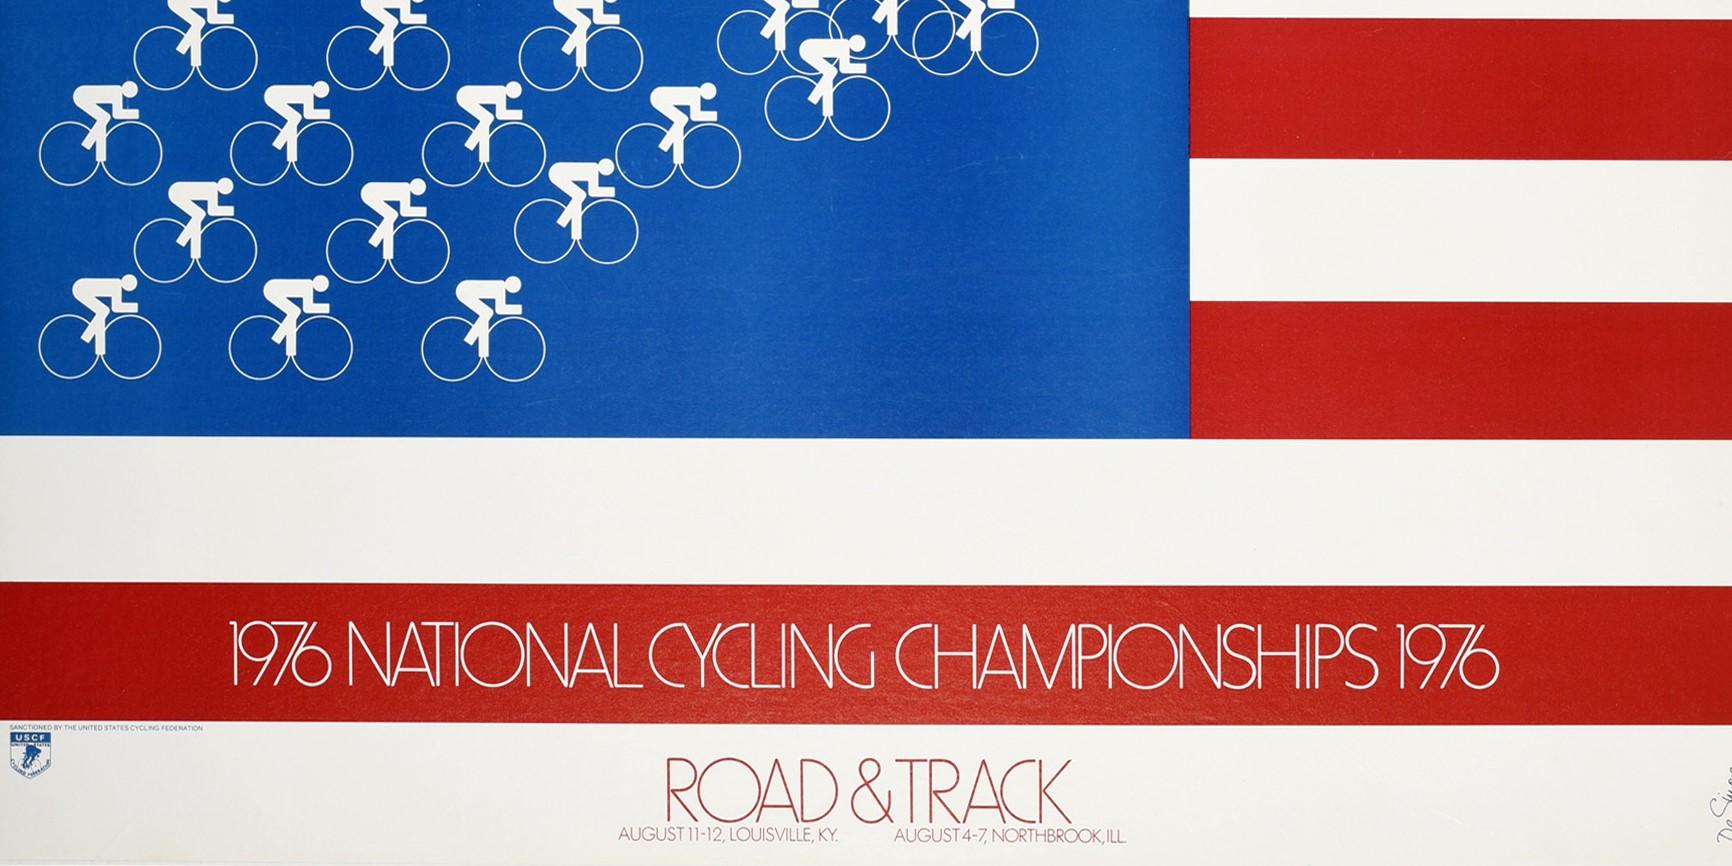 Original vintage sport poster for the 1976 National Cycling Championships 1976 road and track from 4-7 August in Northbrook Illinois and from 11-12 August in Louisville Kentucky featuring a great design of a red and white striped flag of the United